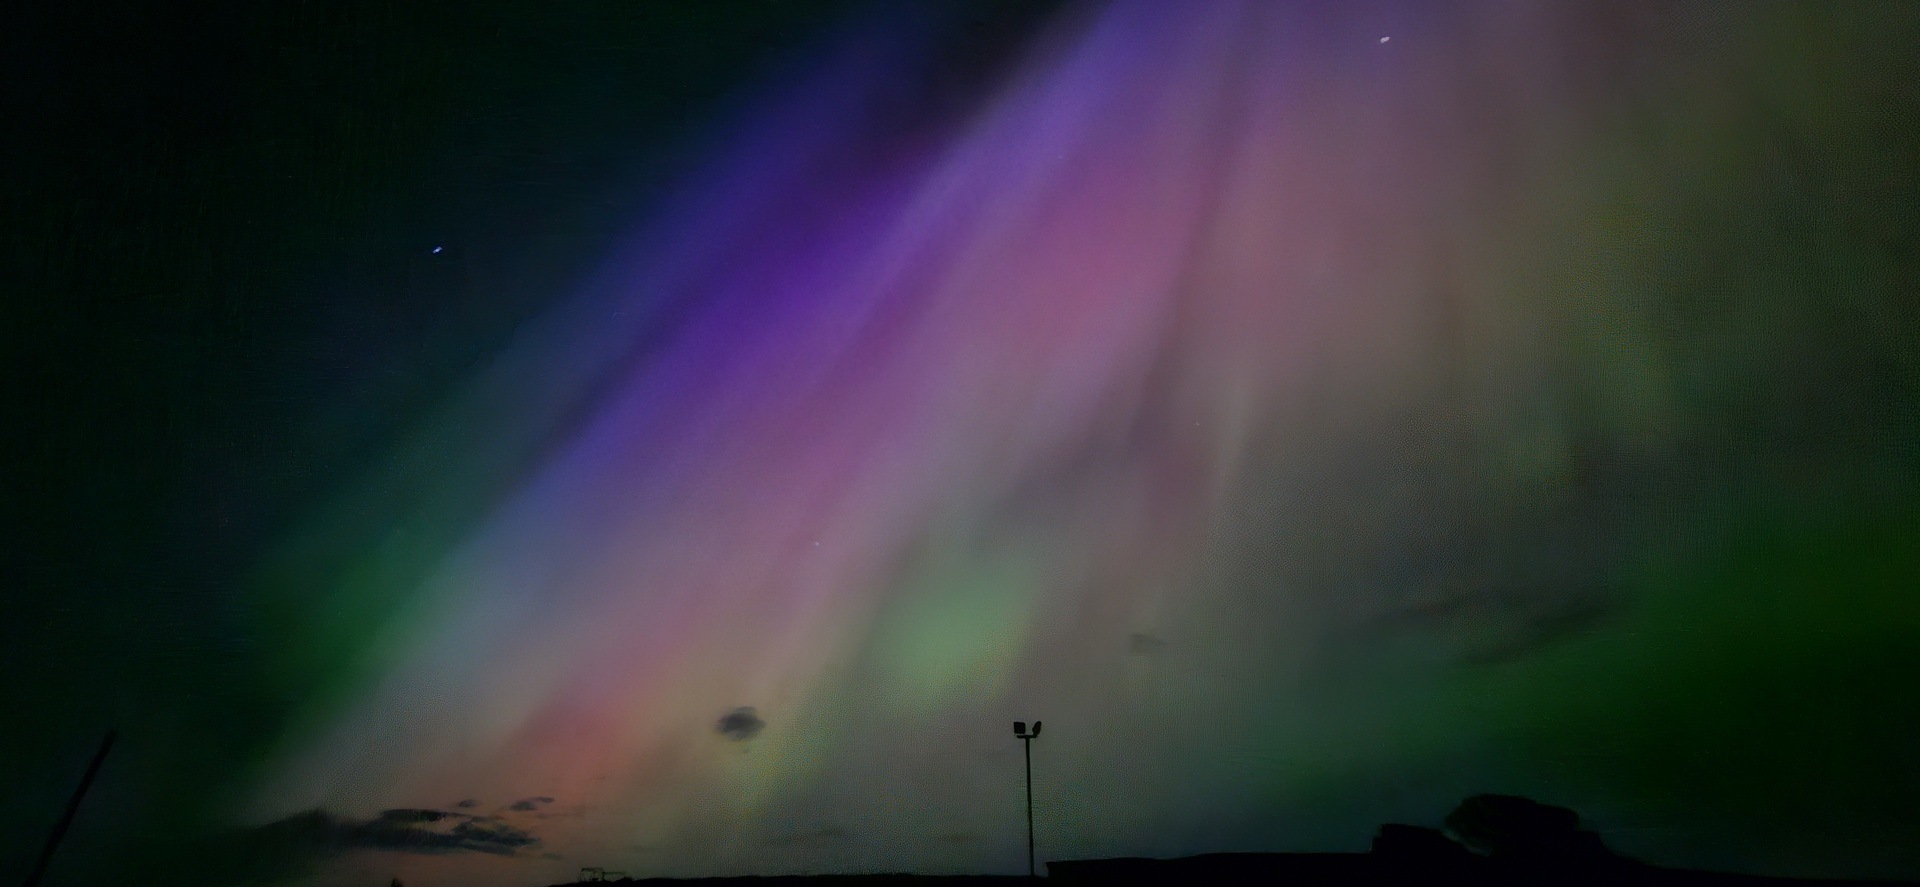 The Northern Lights were visible across large parts of Scotland on Friday night.